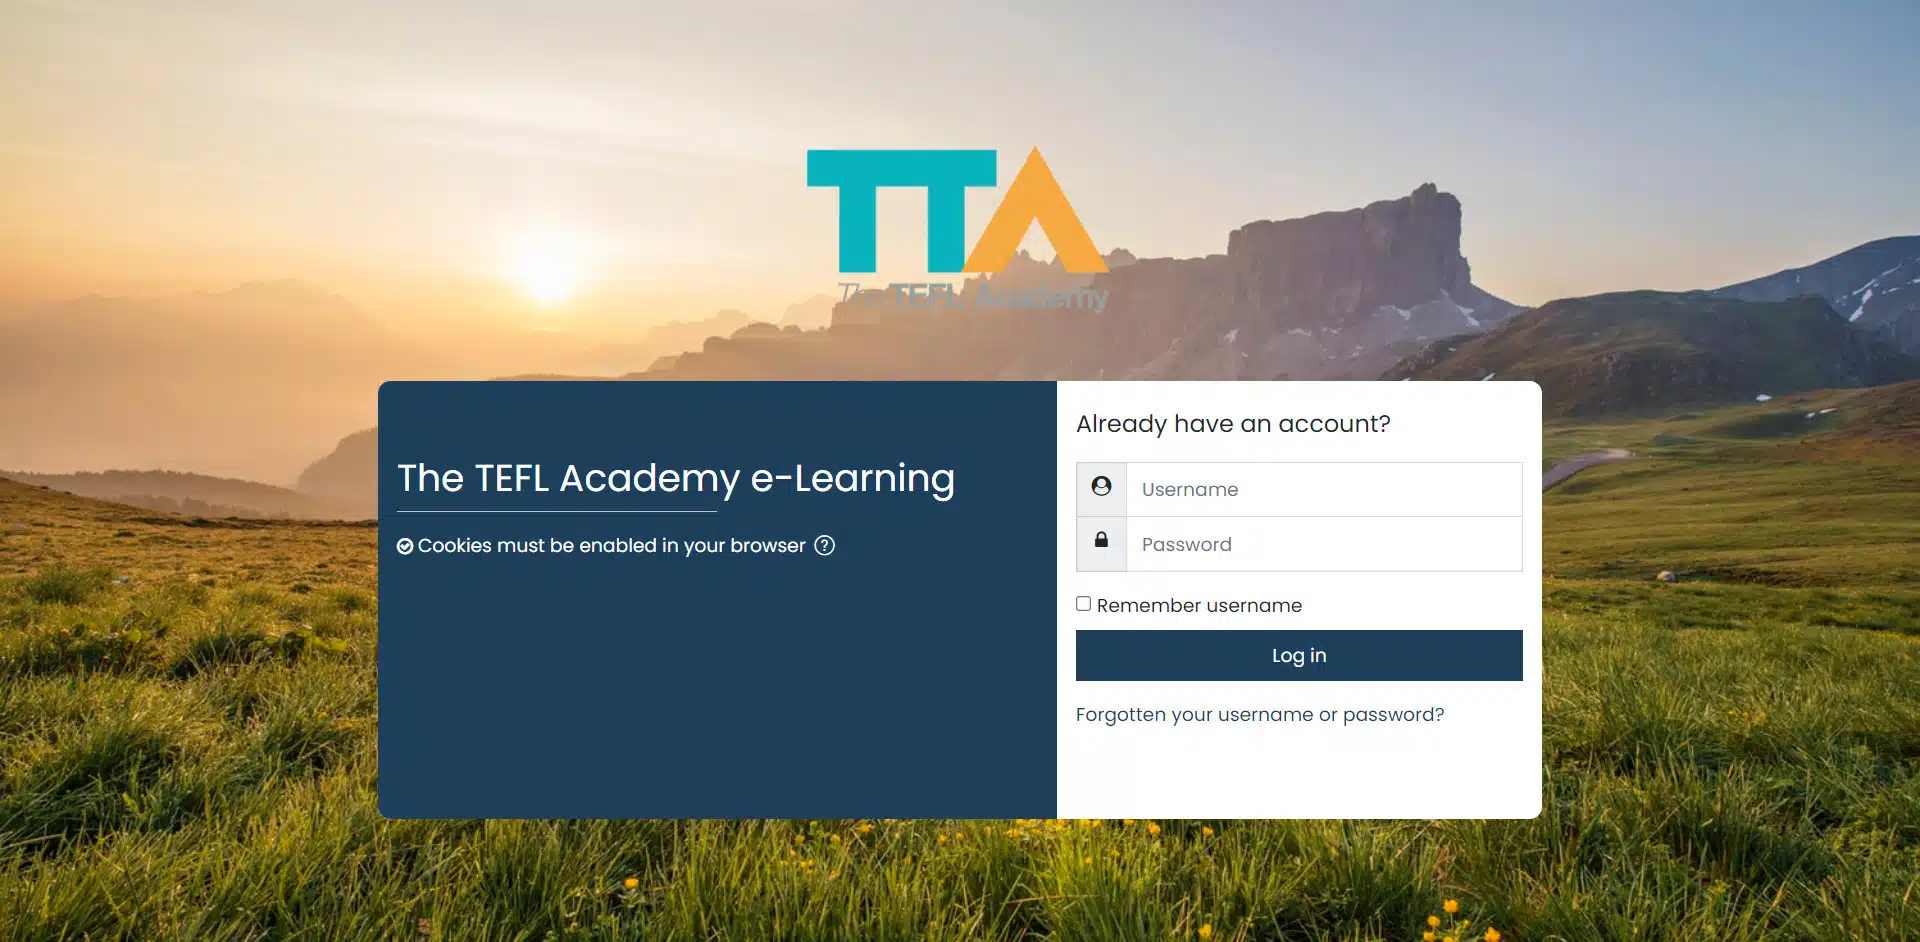 The-TEFL-Academy-e-Learning-Log-in-to-the-site.jpg